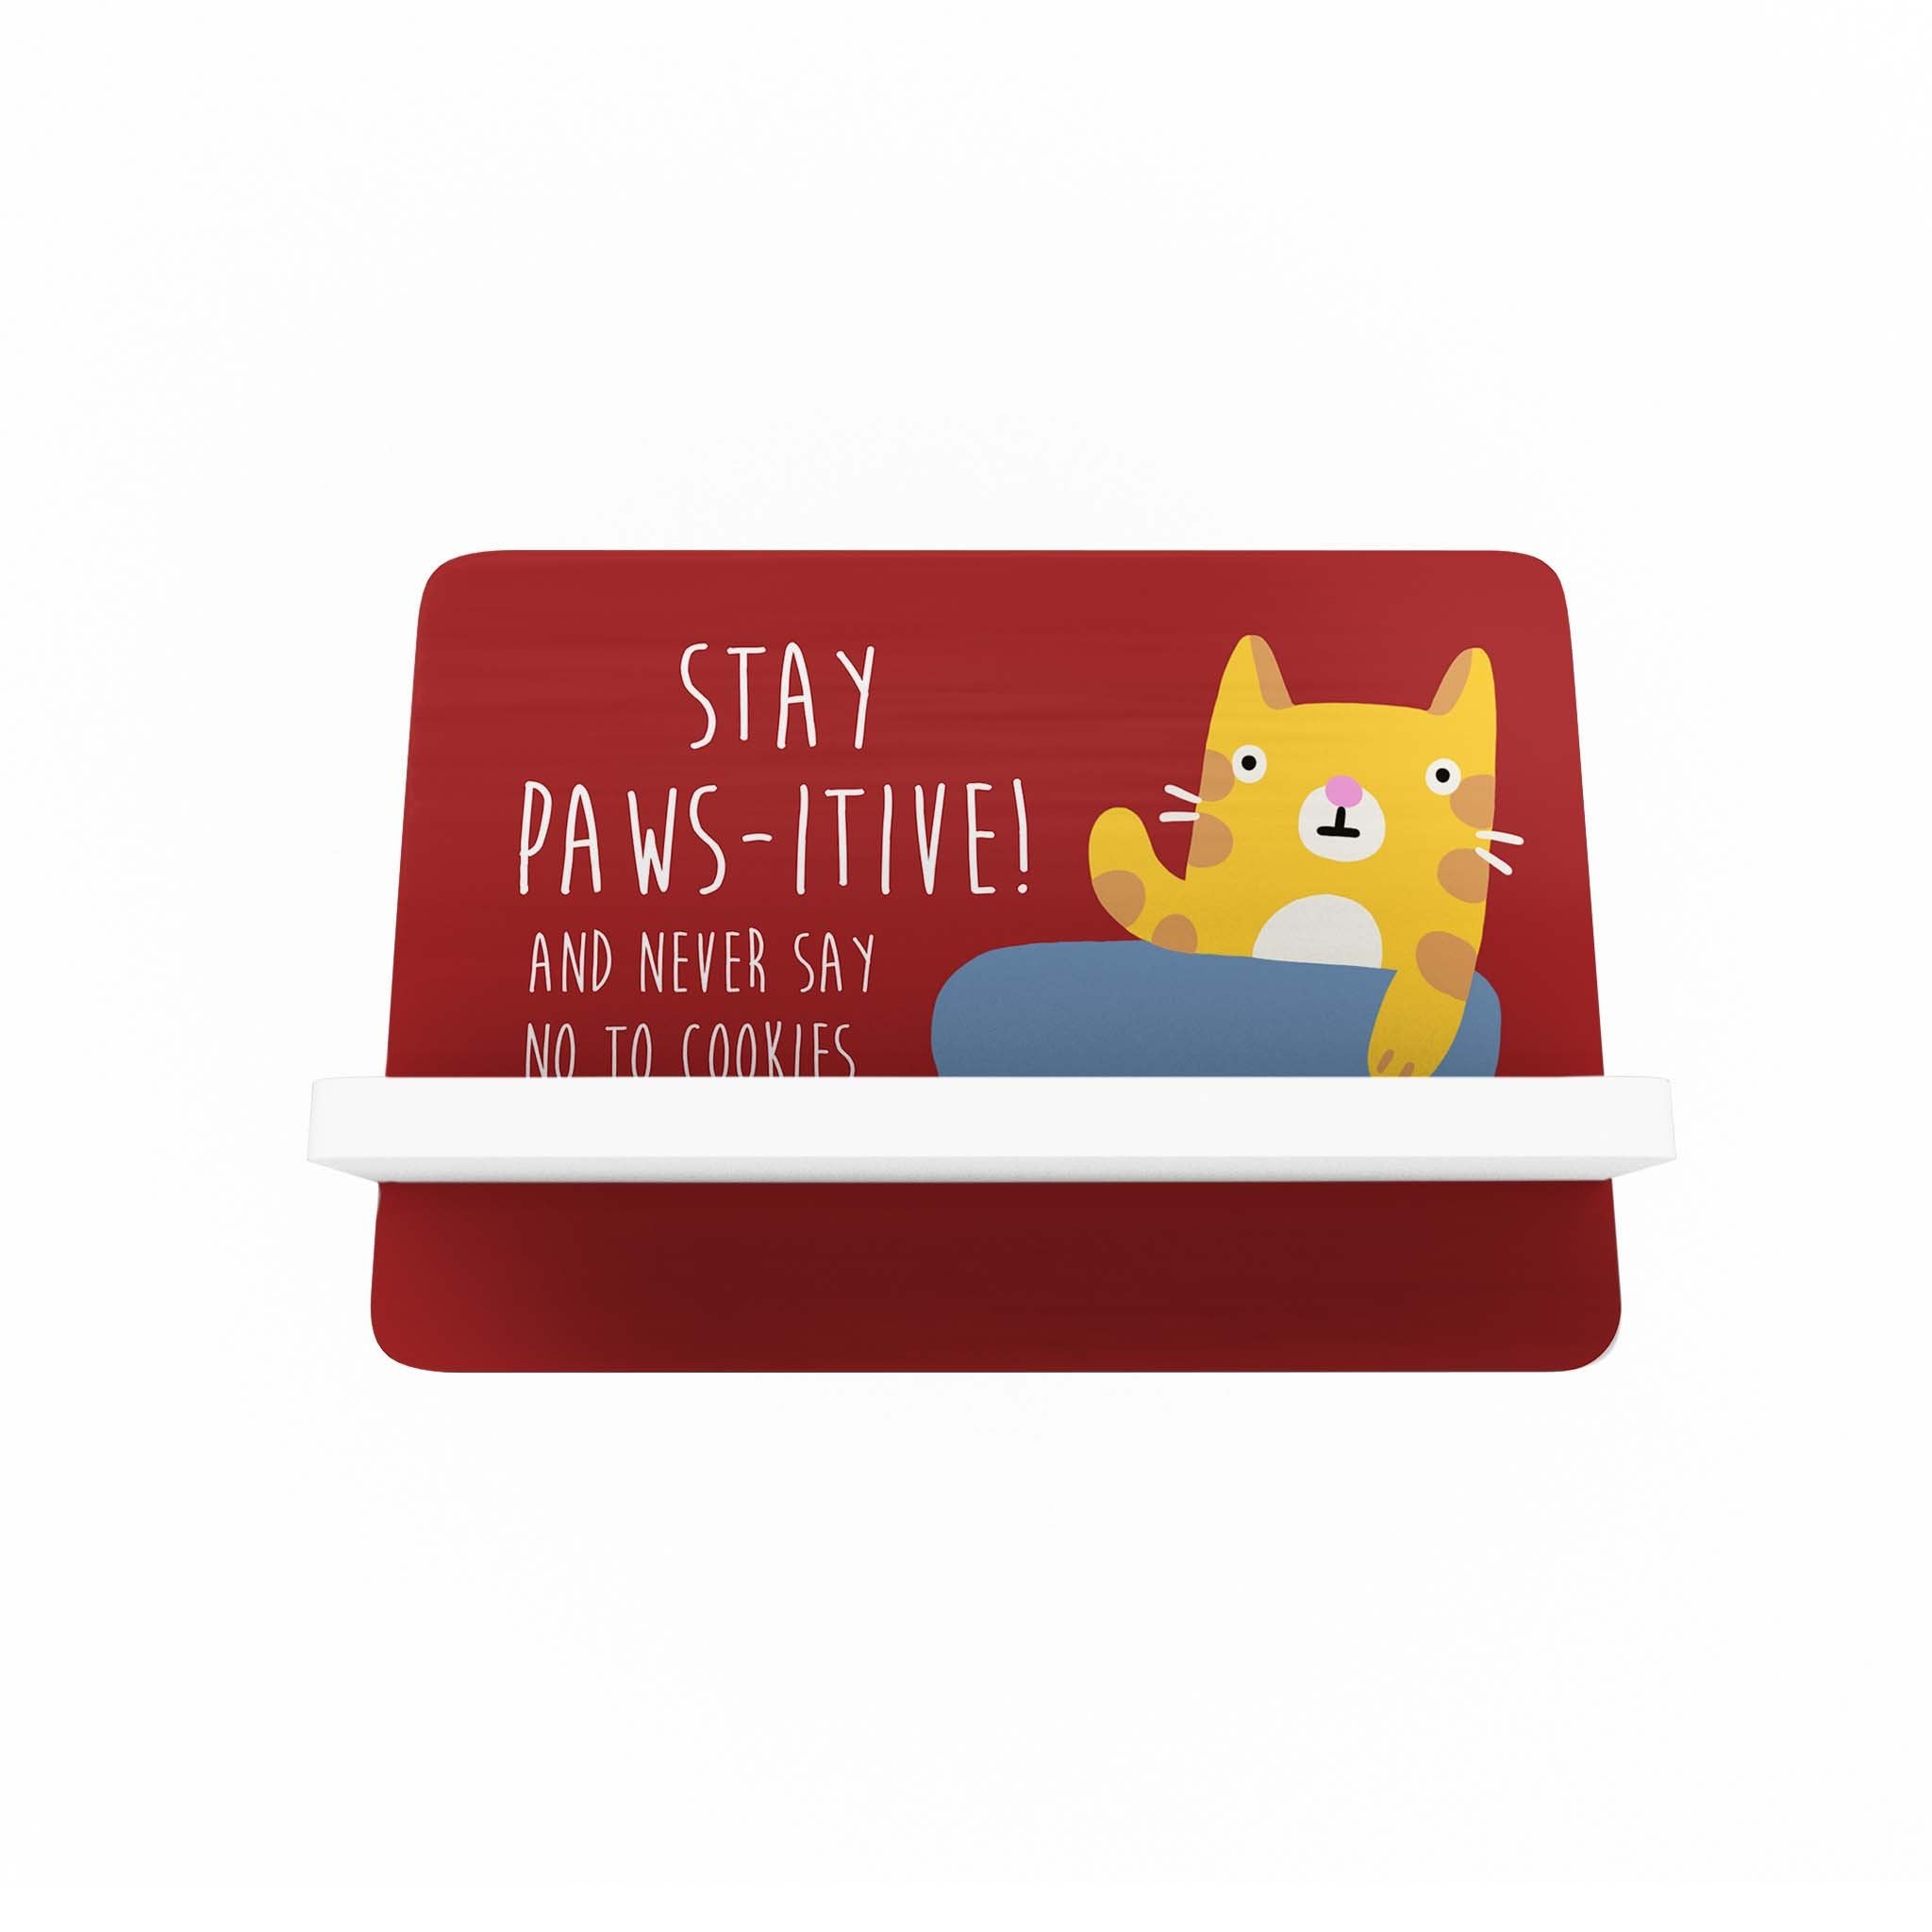 Stay Paws-itive Cellphone Holder